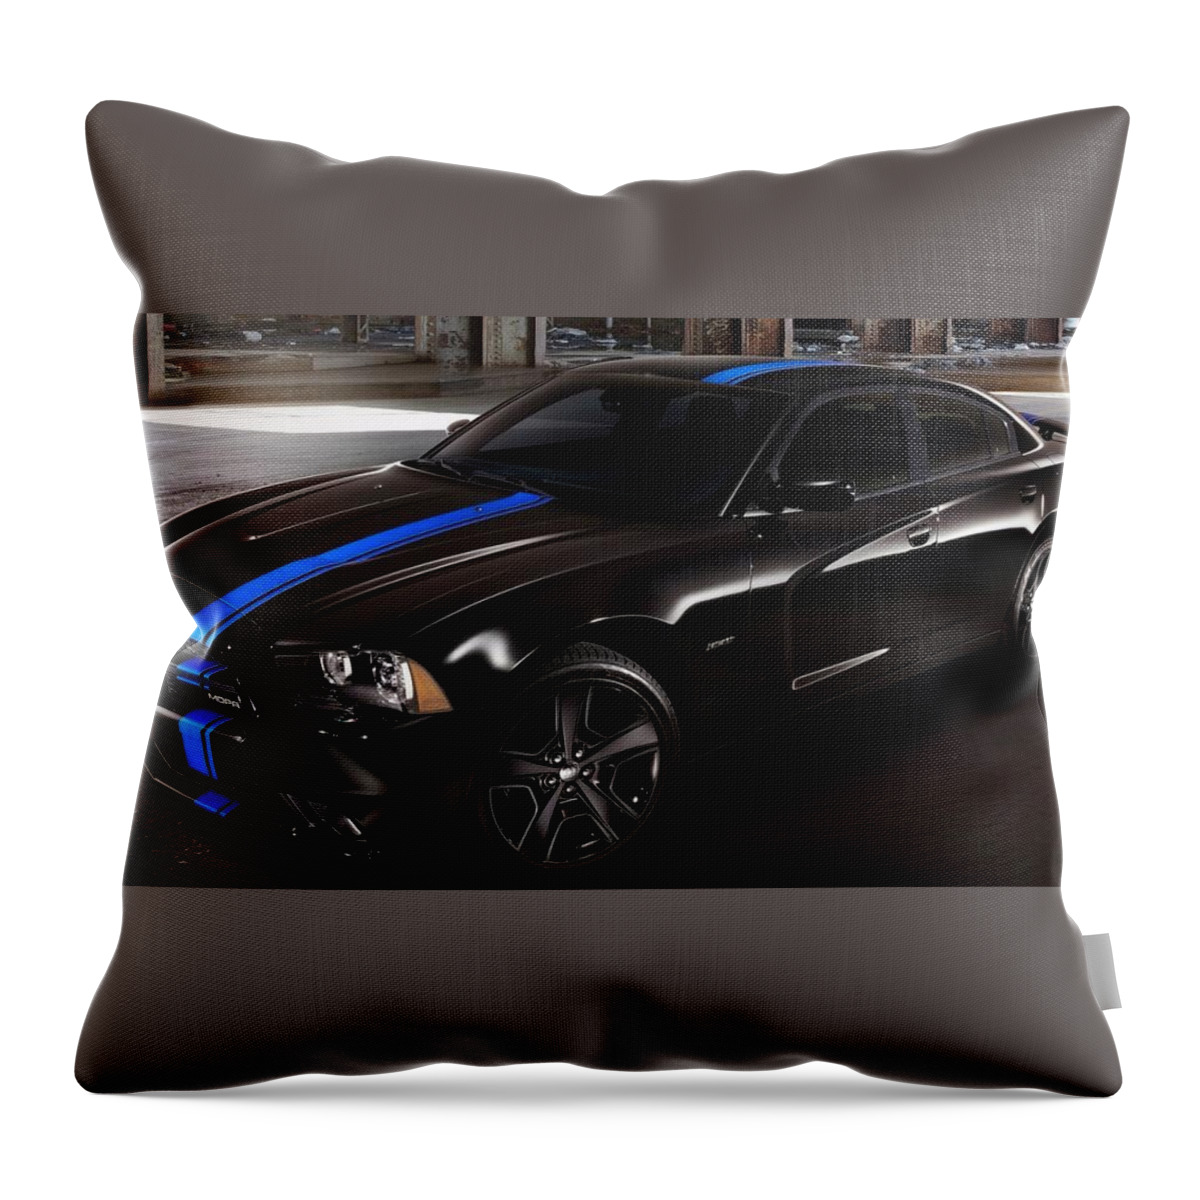 2011 Dodge Charger Throw Pillow featuring the photograph 2011 Dodge Charger by Jackie Russo